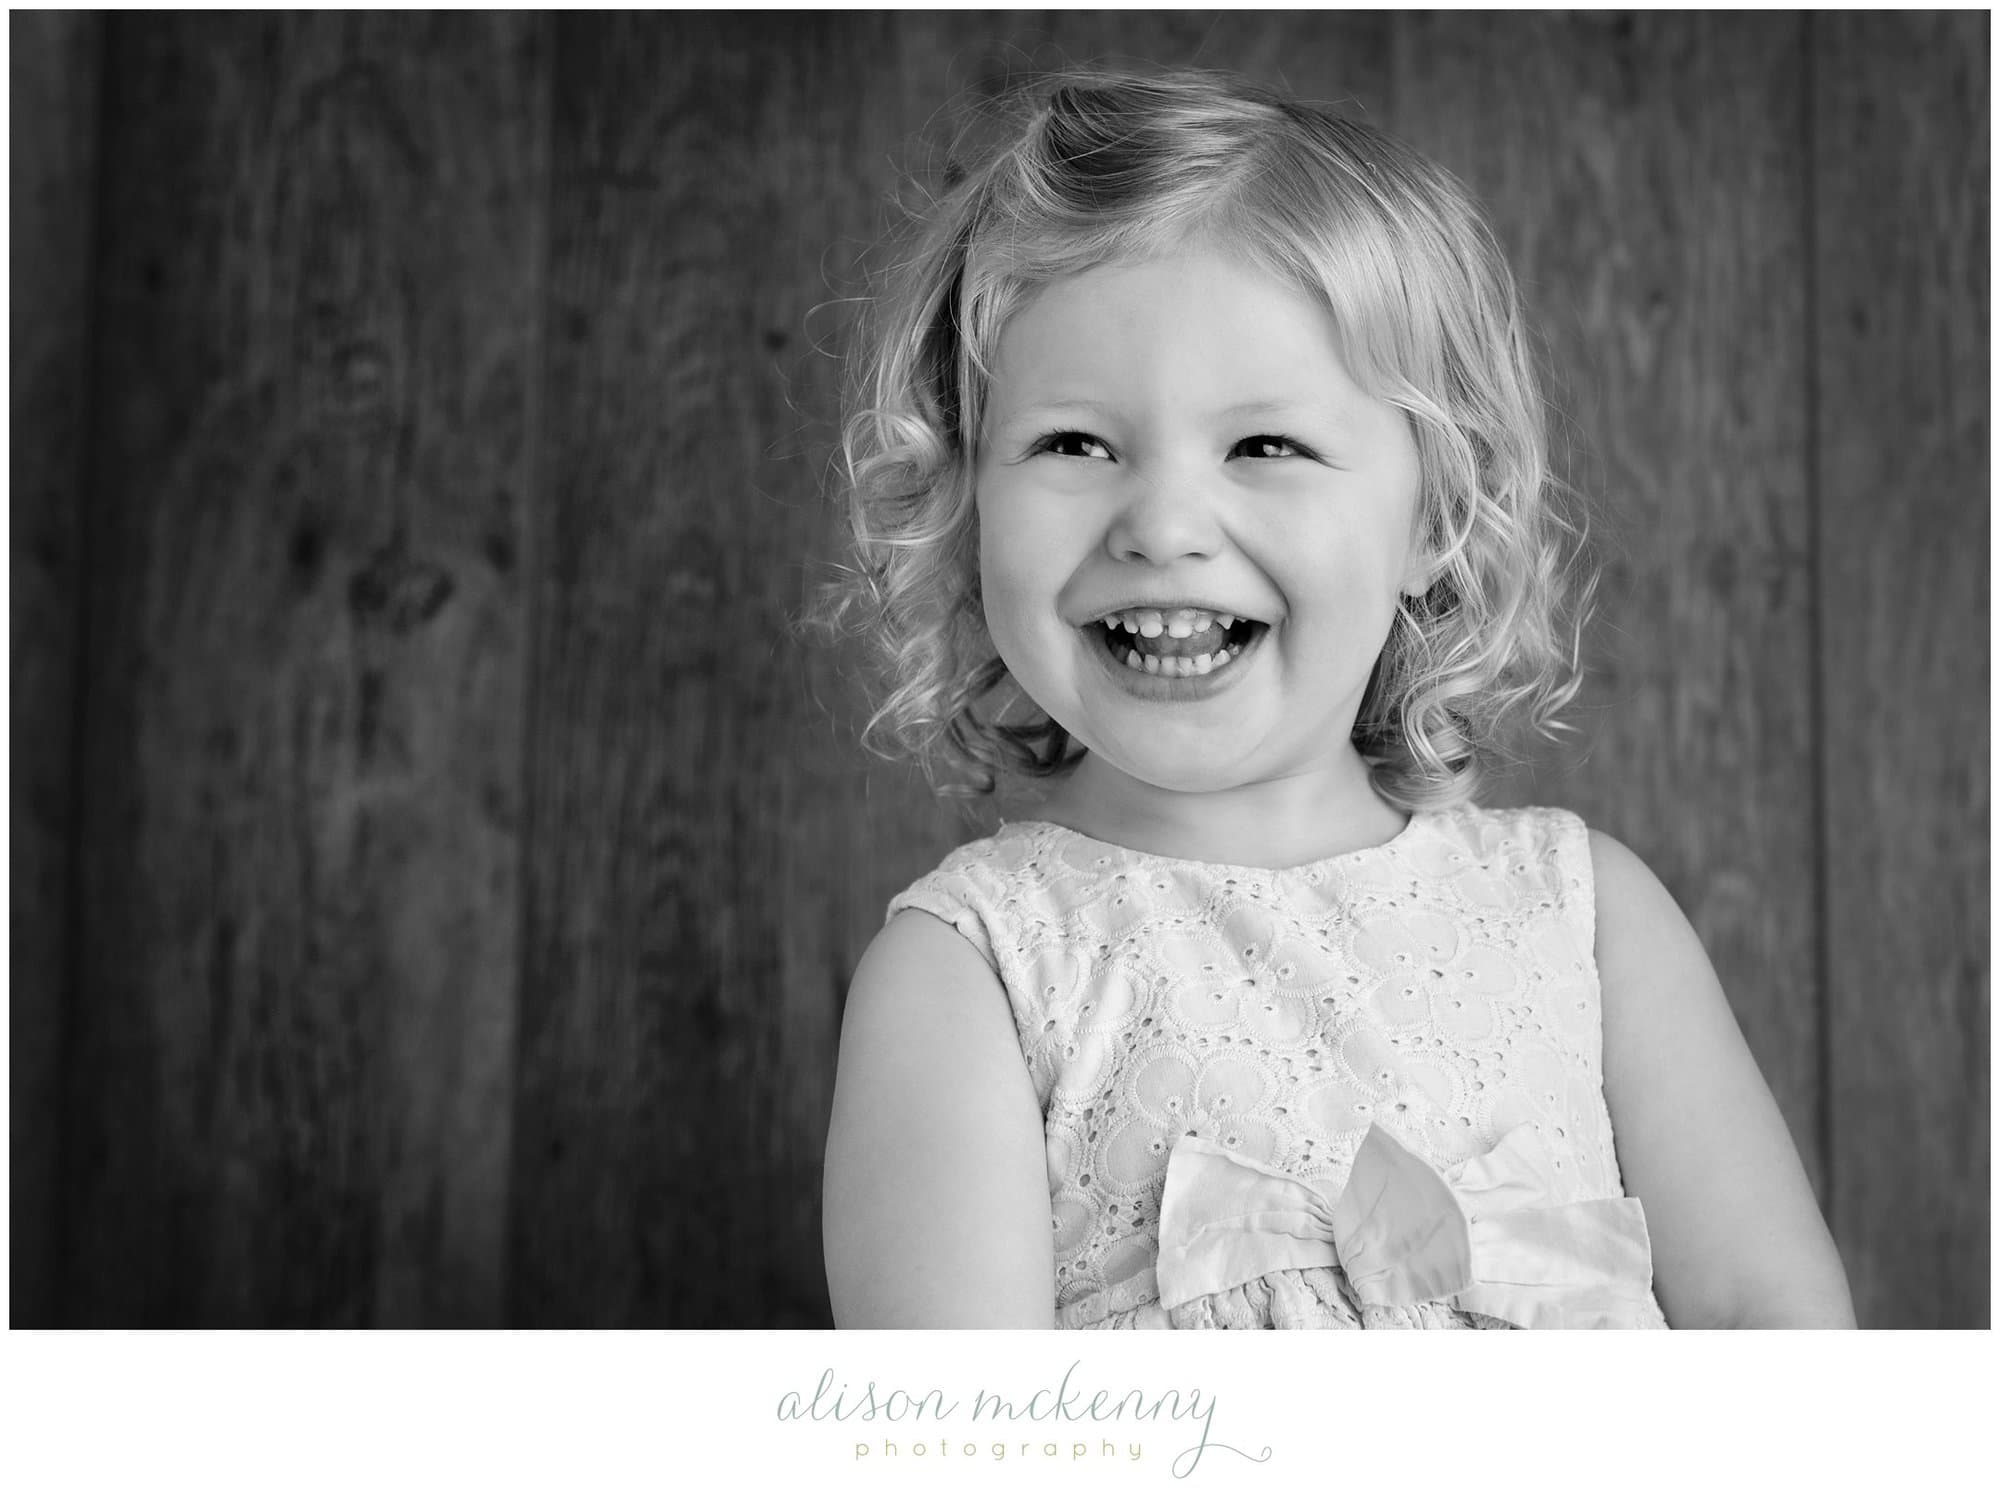 Marley and Lyla - Baby Photography Suffolk - Alison McKenny Photography